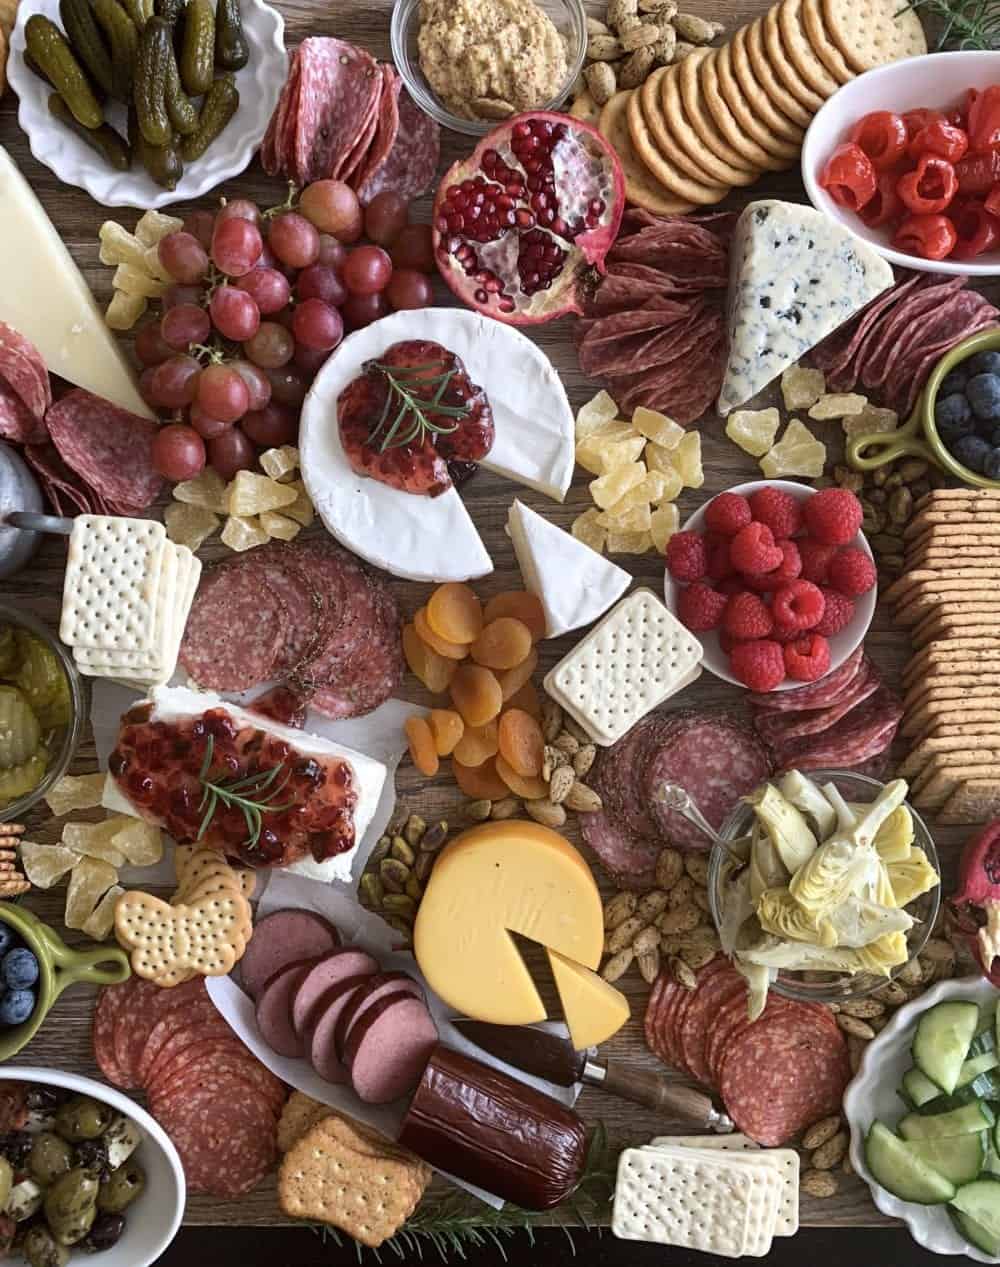 How to Make a Perfect Charcuterie Board